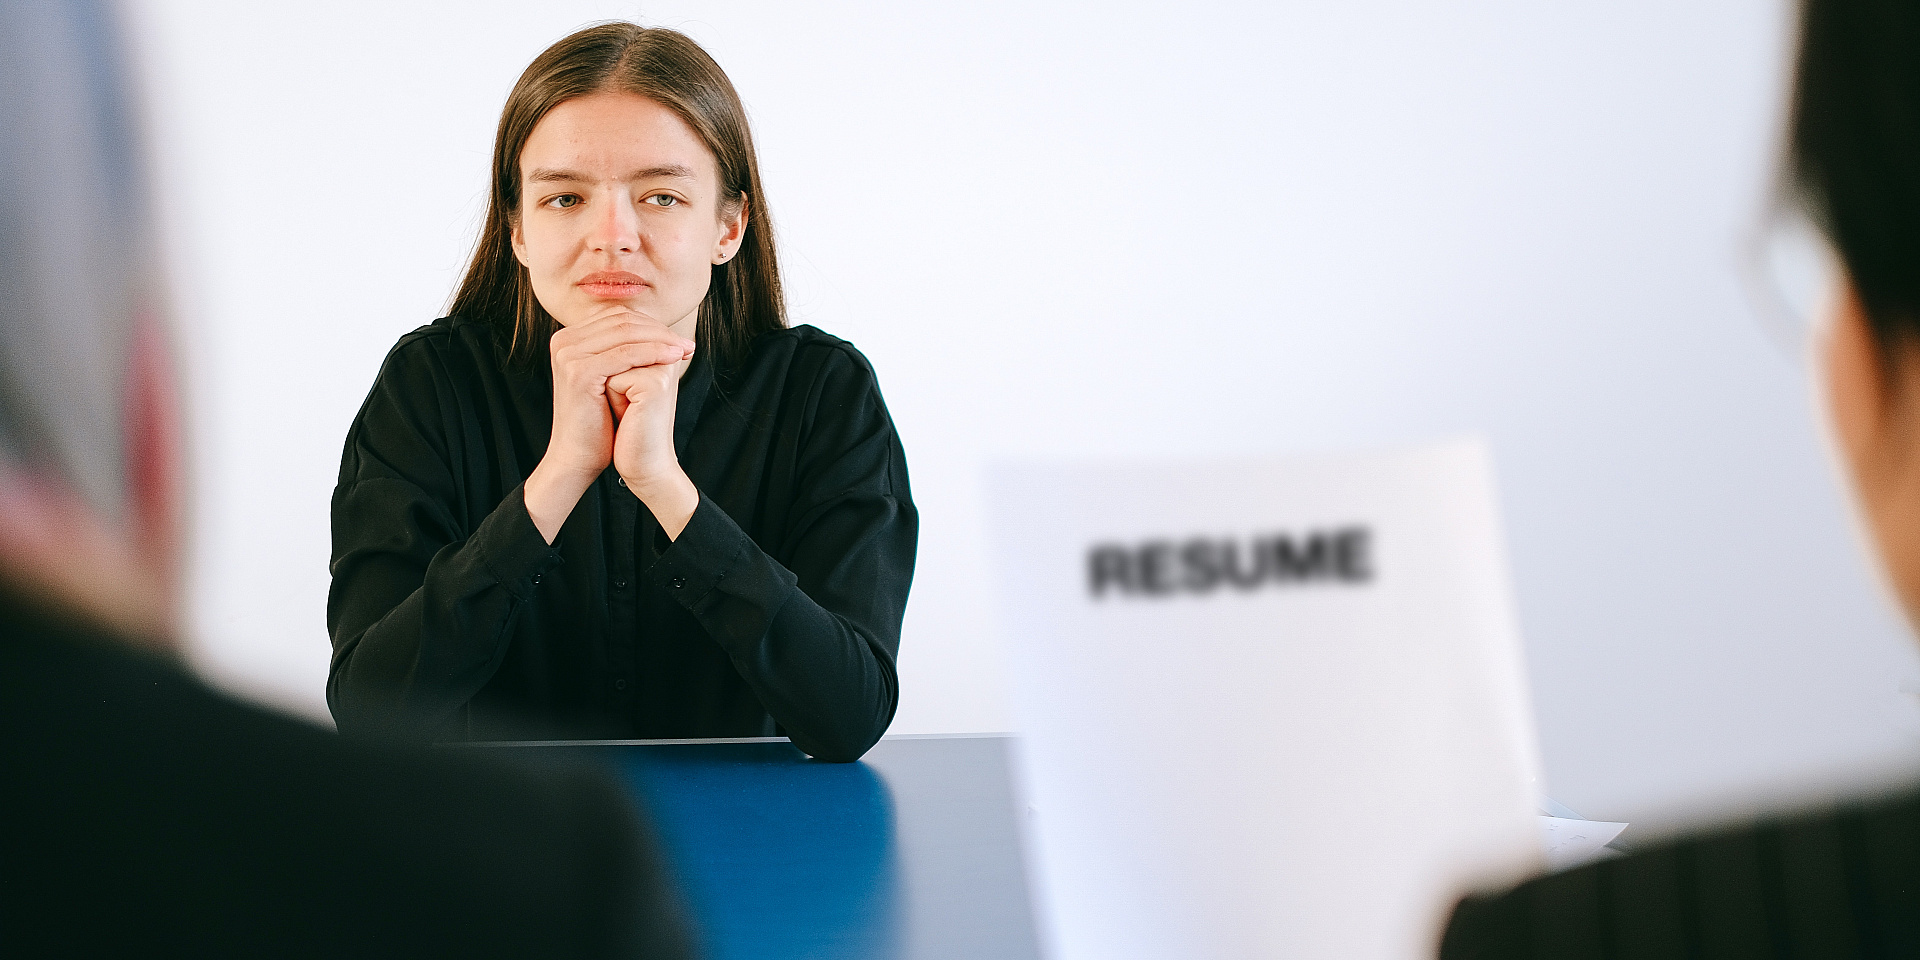 Woman waiting as two individuals read a paper with the word "Resume" on it